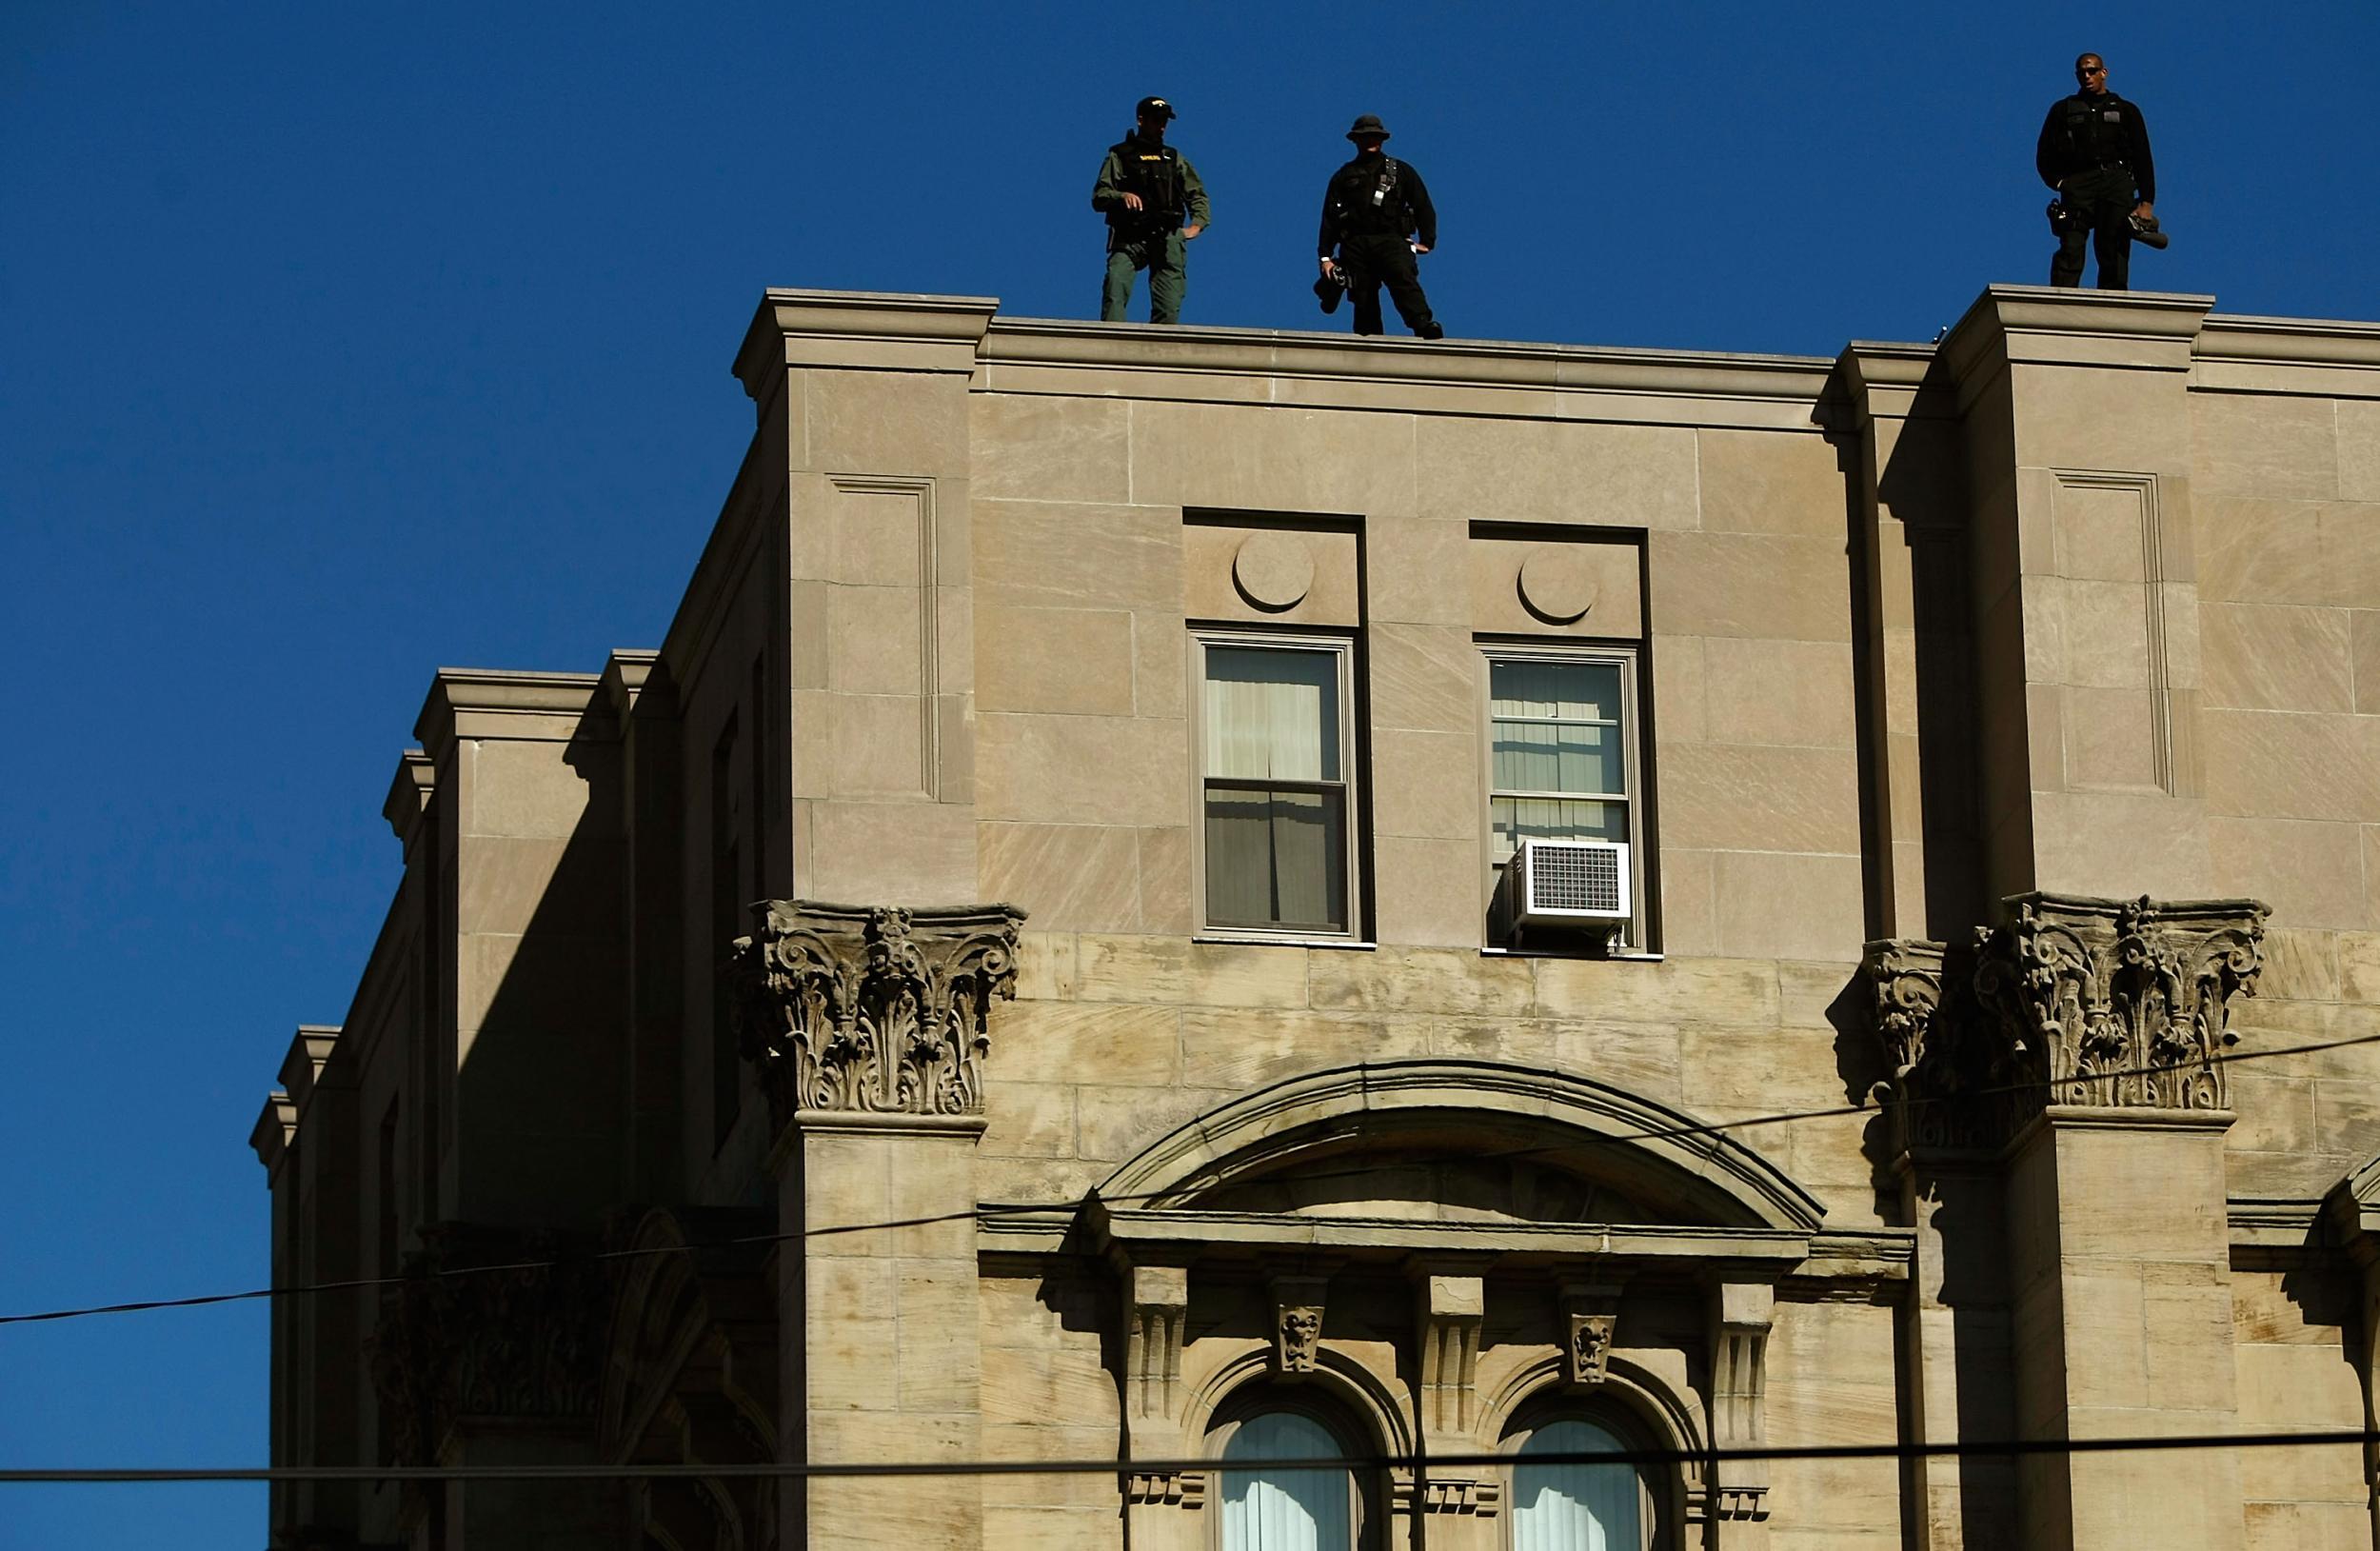 Police officers stand on top of the Jefferson County courthouse in Steubenville, Ohio in this photo from 2008